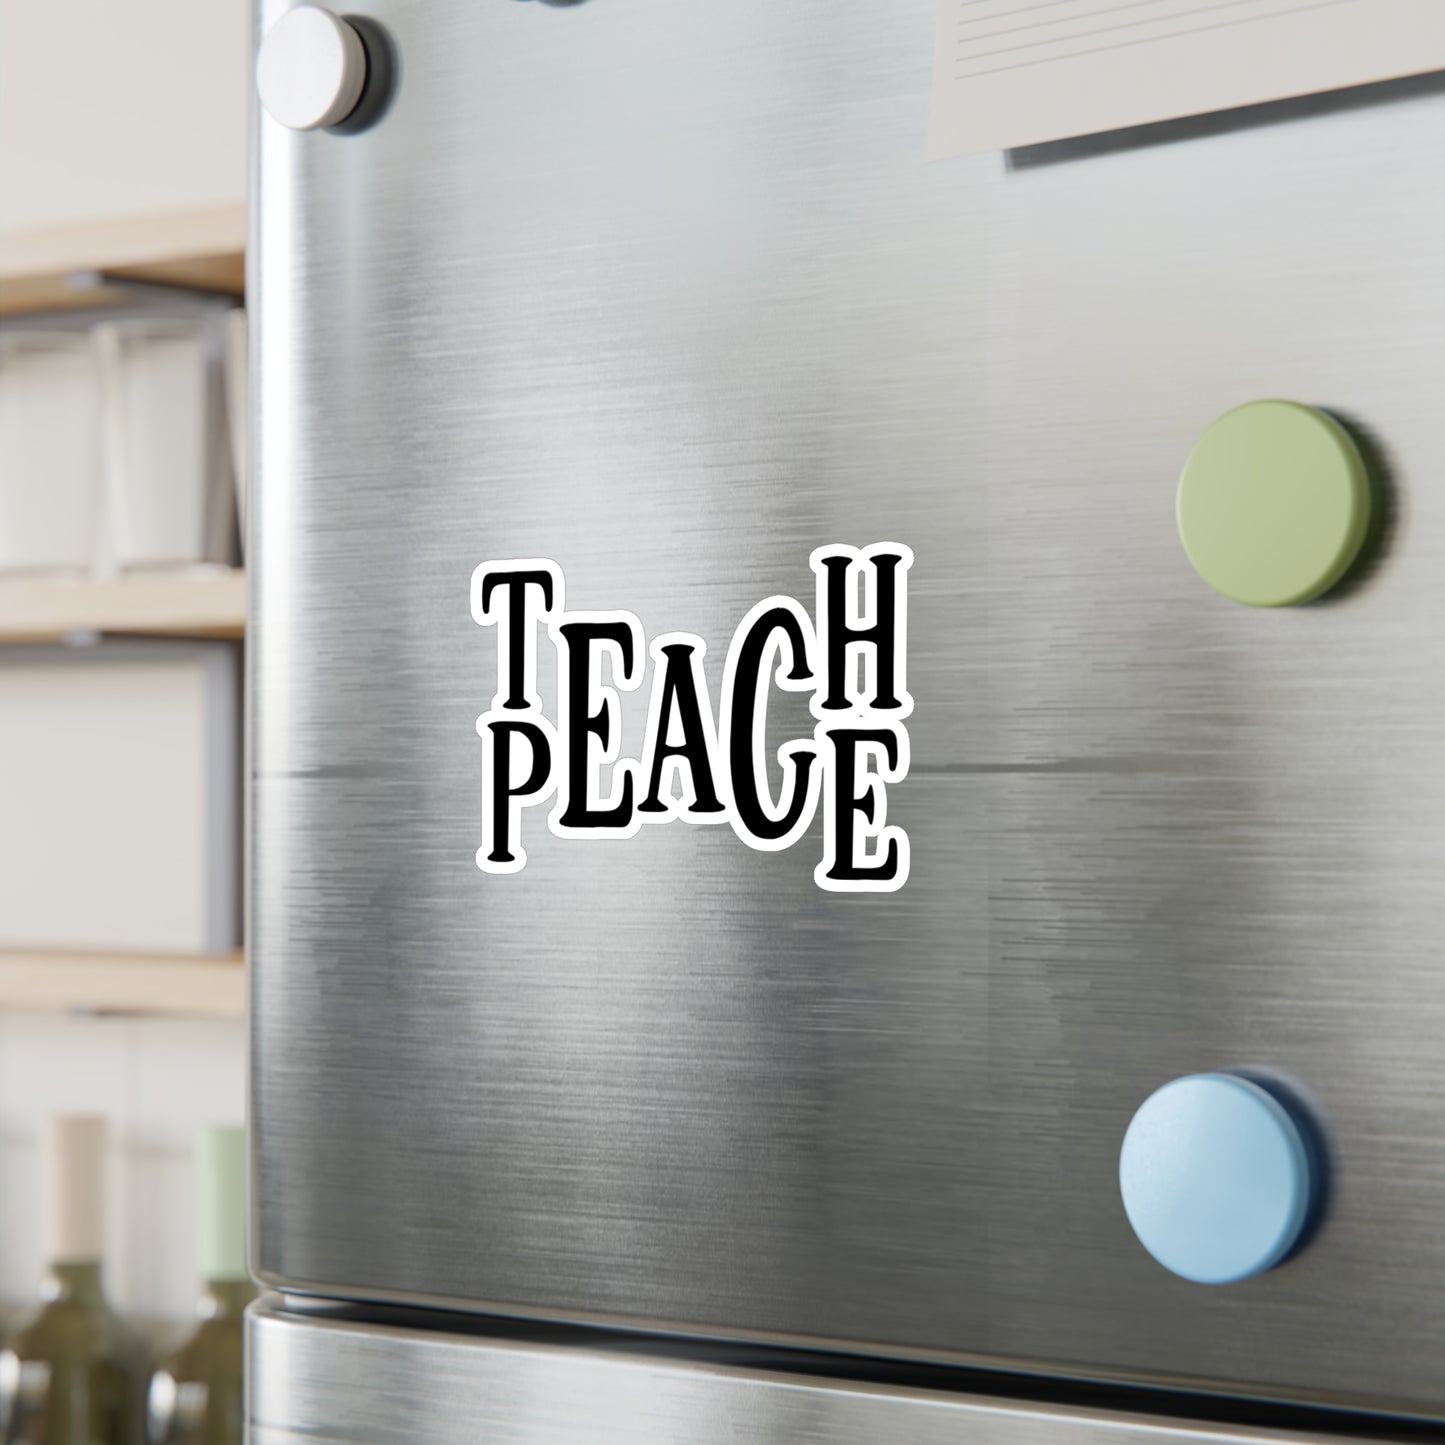 "Teach Peace" Kiss-Cut Vinyl Decal - Weave Got Gifts - Unique Gifts You Won’t Find Anywhere Else!